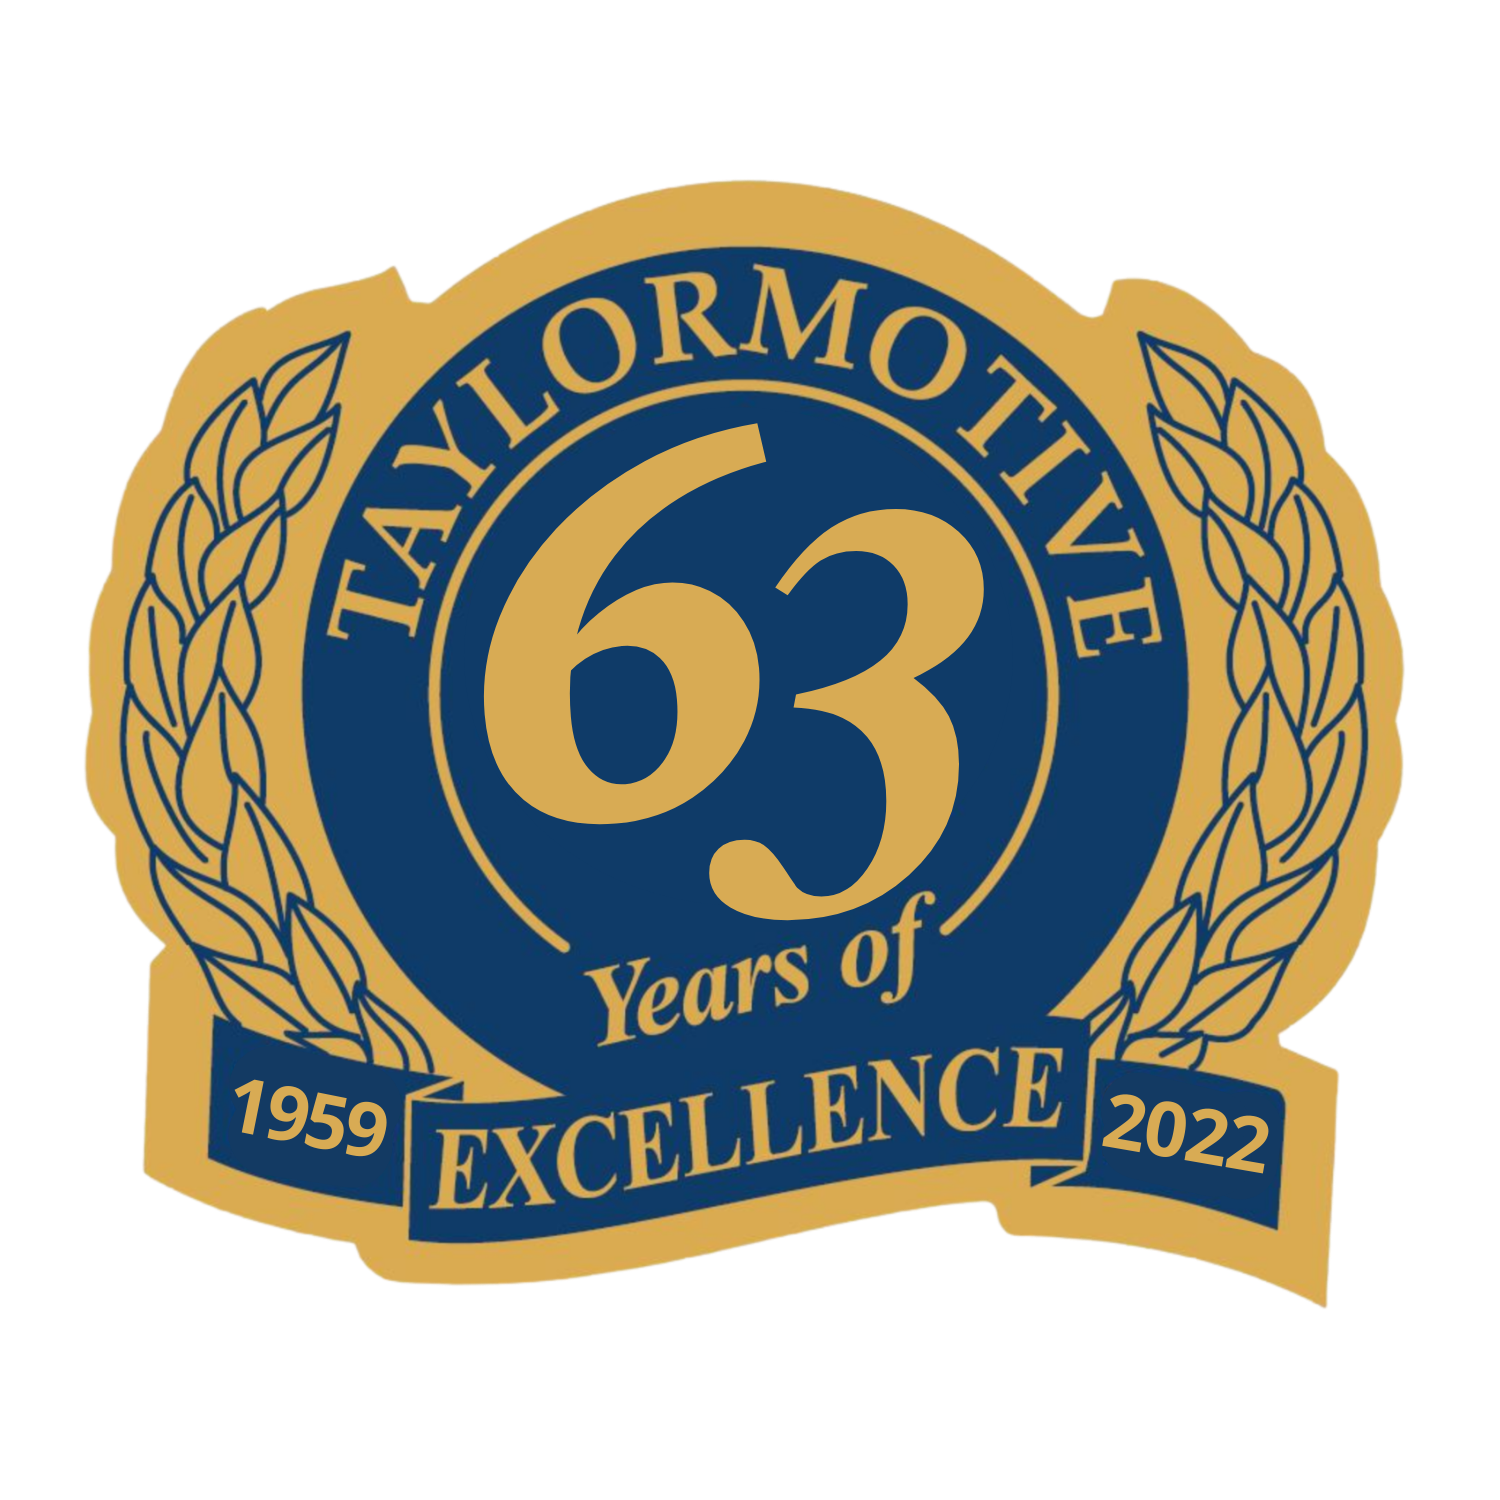 Over 63 years of Excellence.